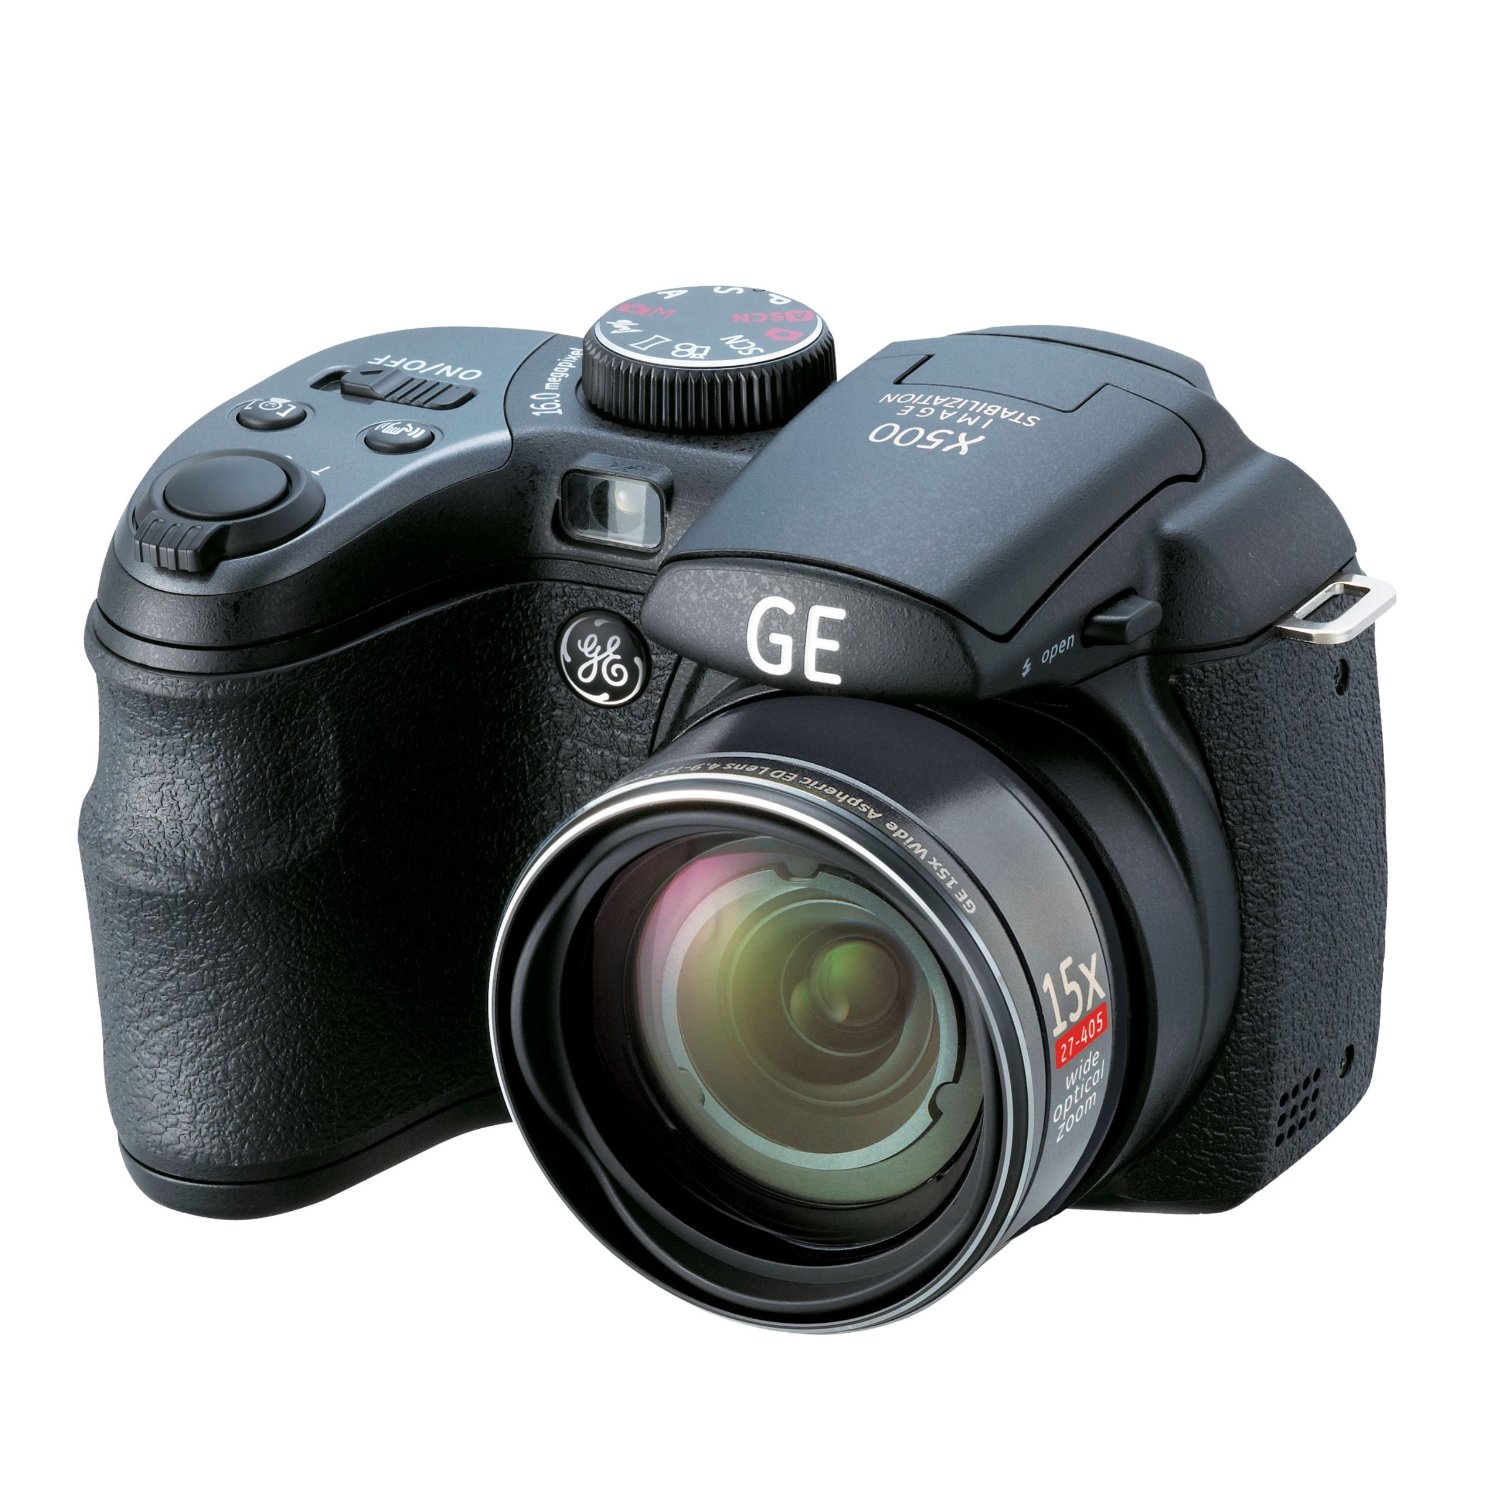 http://thetechjournal.com/wp-content/uploads/images/1203/1332339890-ge-power-pro-x500bk-16-mp-with-15-x-optical-zoom-digital-camera-7.jpg